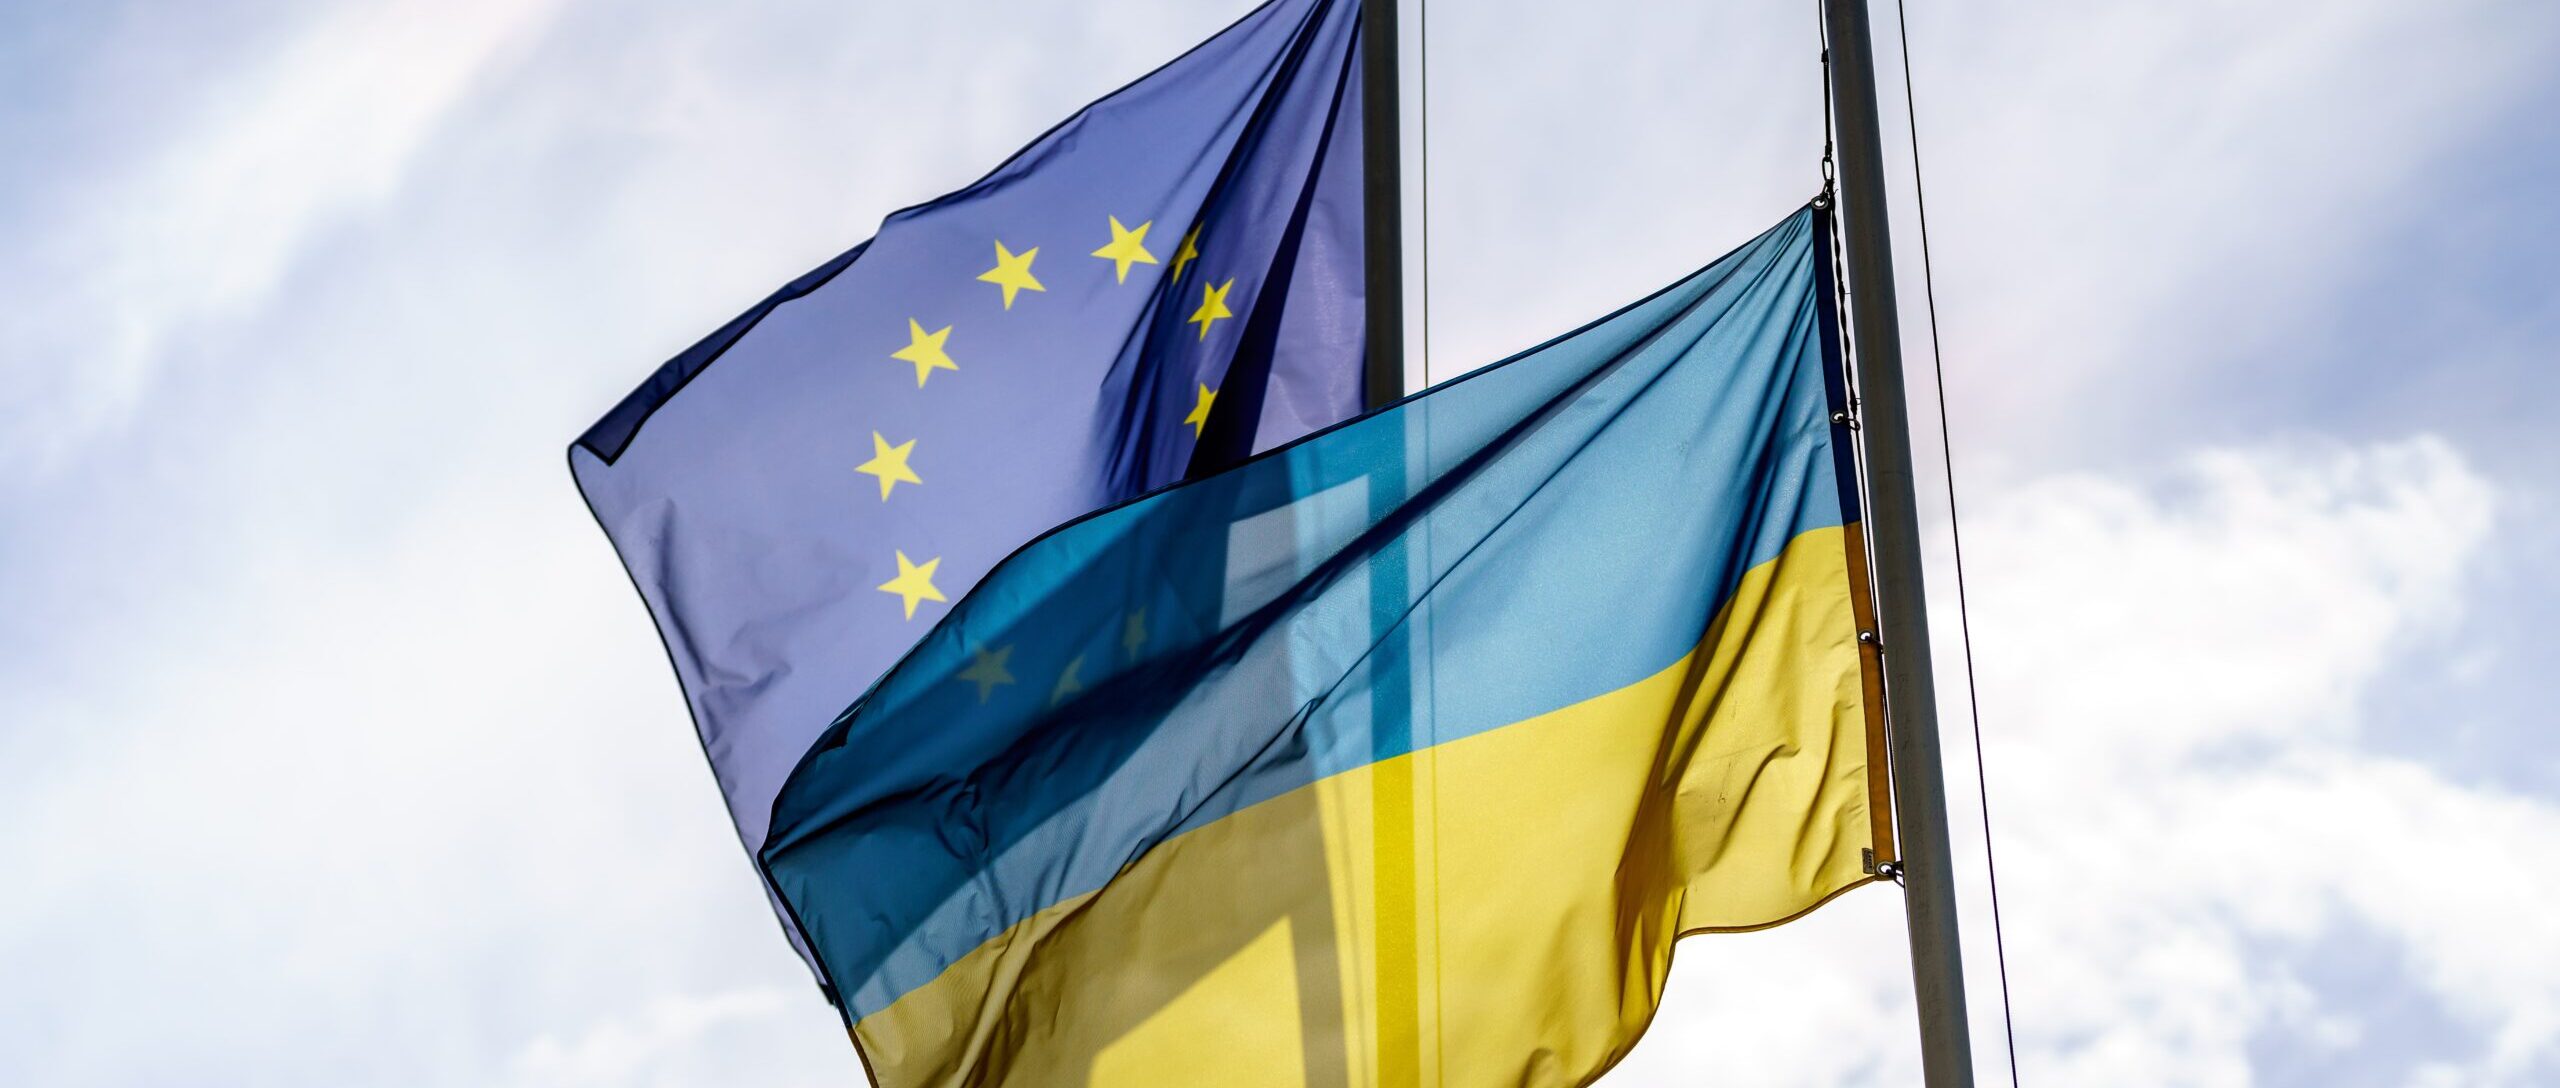 “From Kyiv to Lisbon”: Global Ukrainians appeal to Europe to support Ukraine